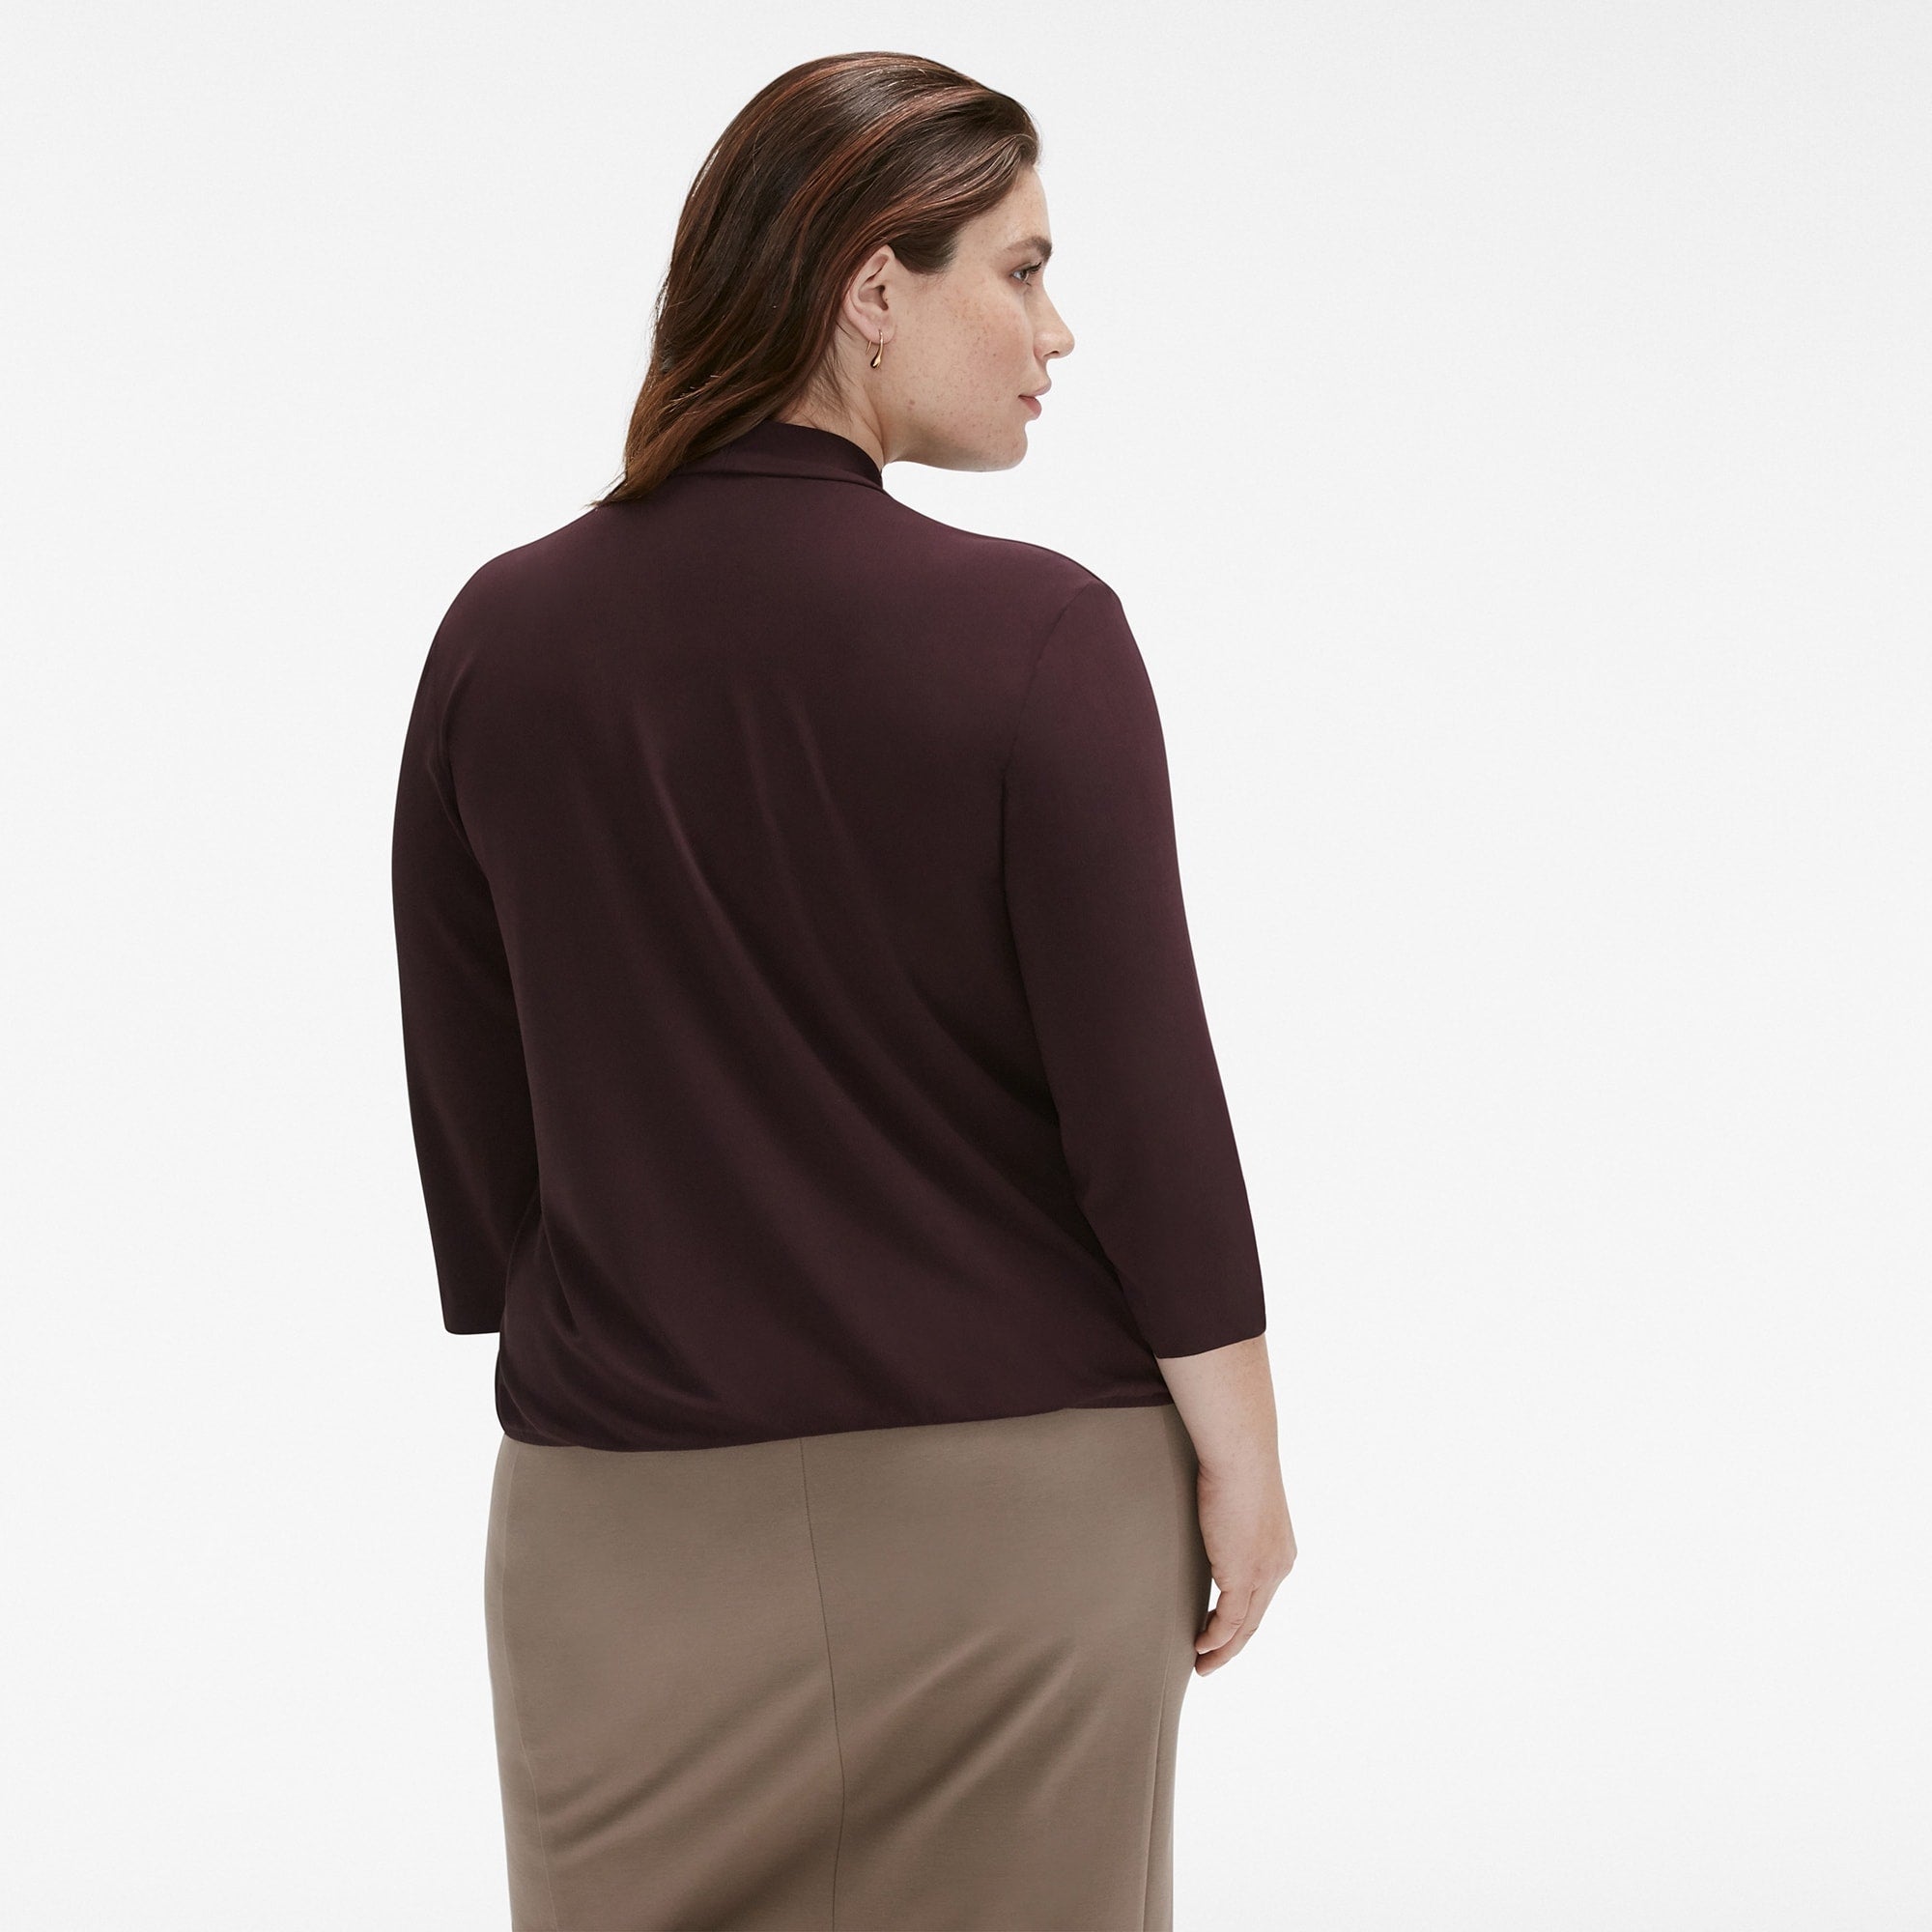 Back image of a woman standing wearing the Deneuve Top in blackberry